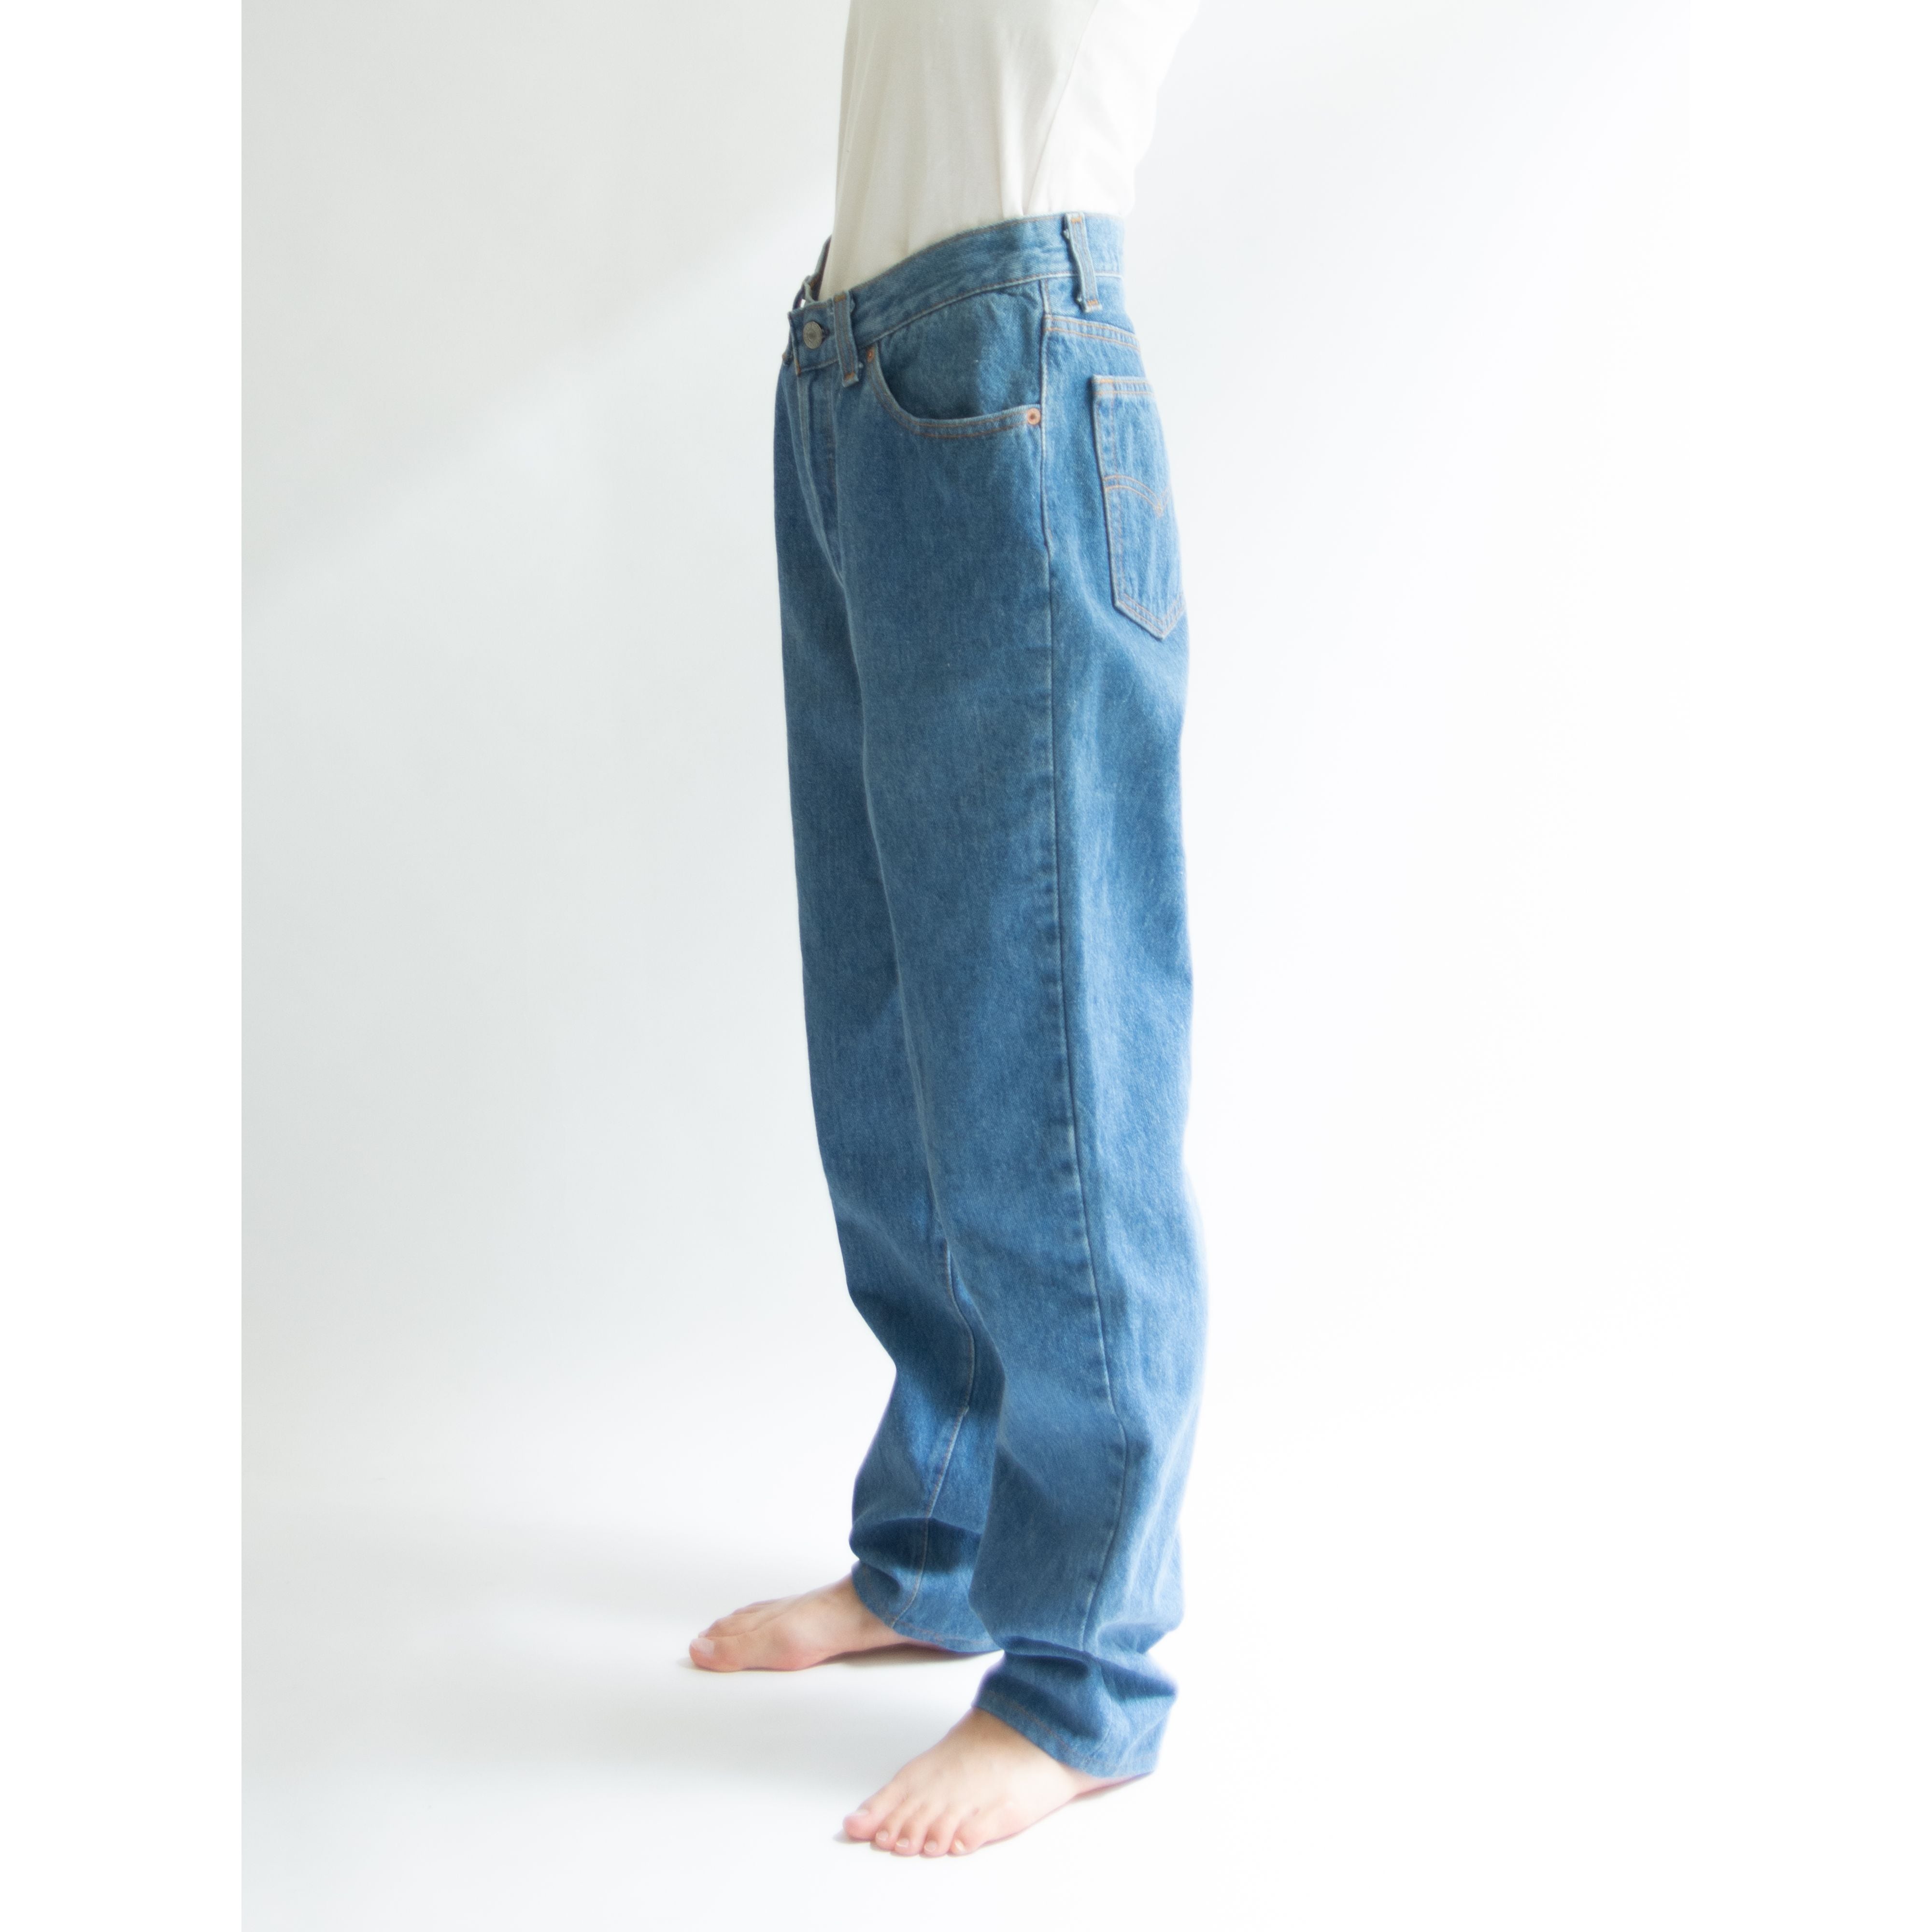 LEVI'S 17501】Made in U.S.A. 90's tapered denim pants 9M 